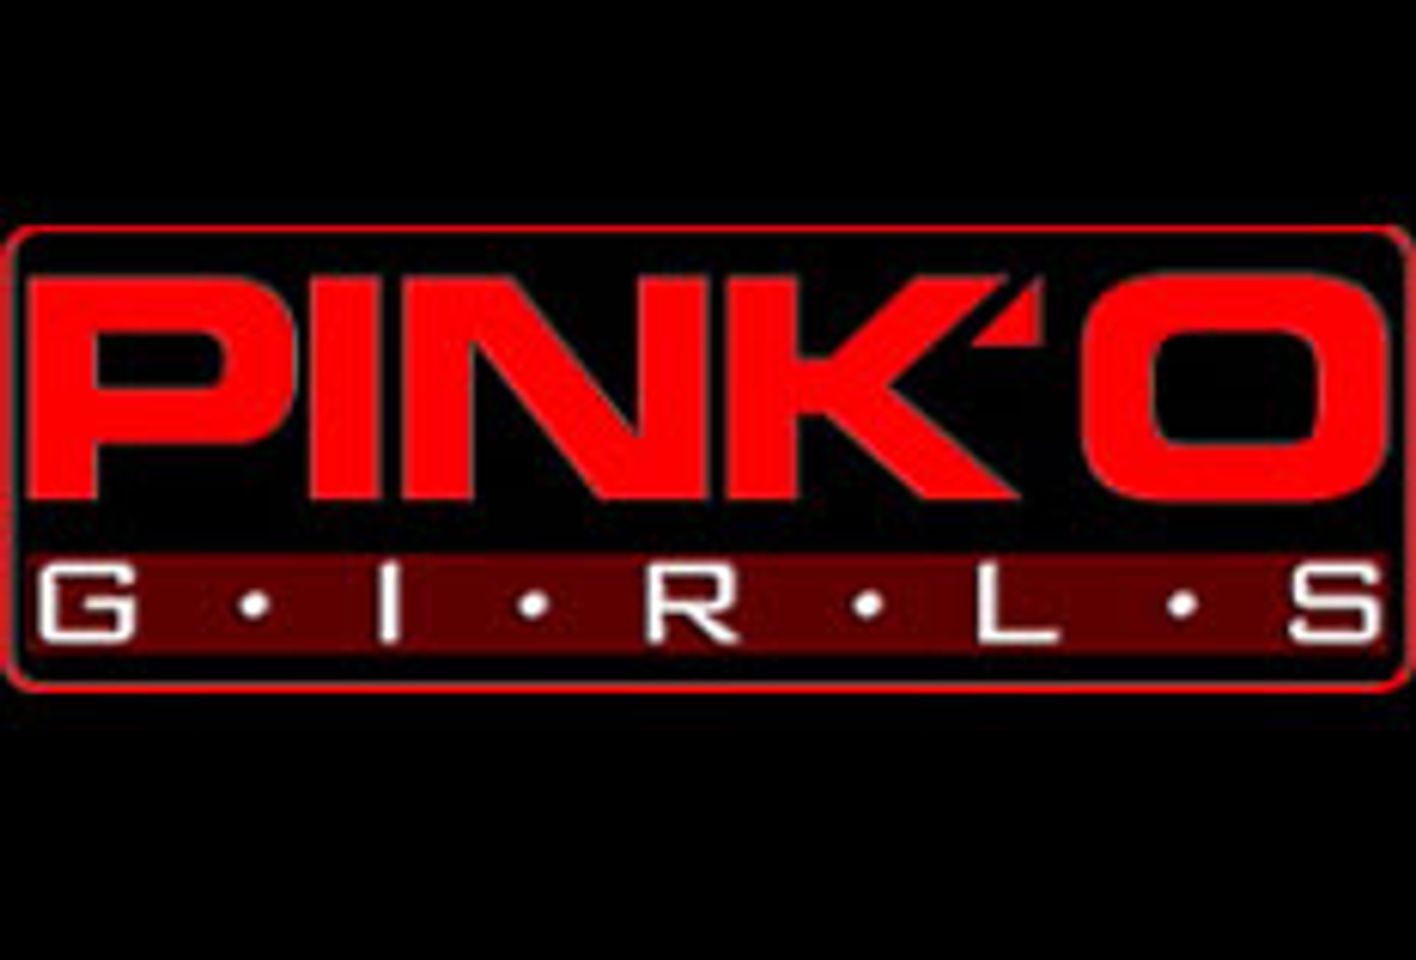 Italy-based PINK’O Signs Exclusively with WorldWideContent